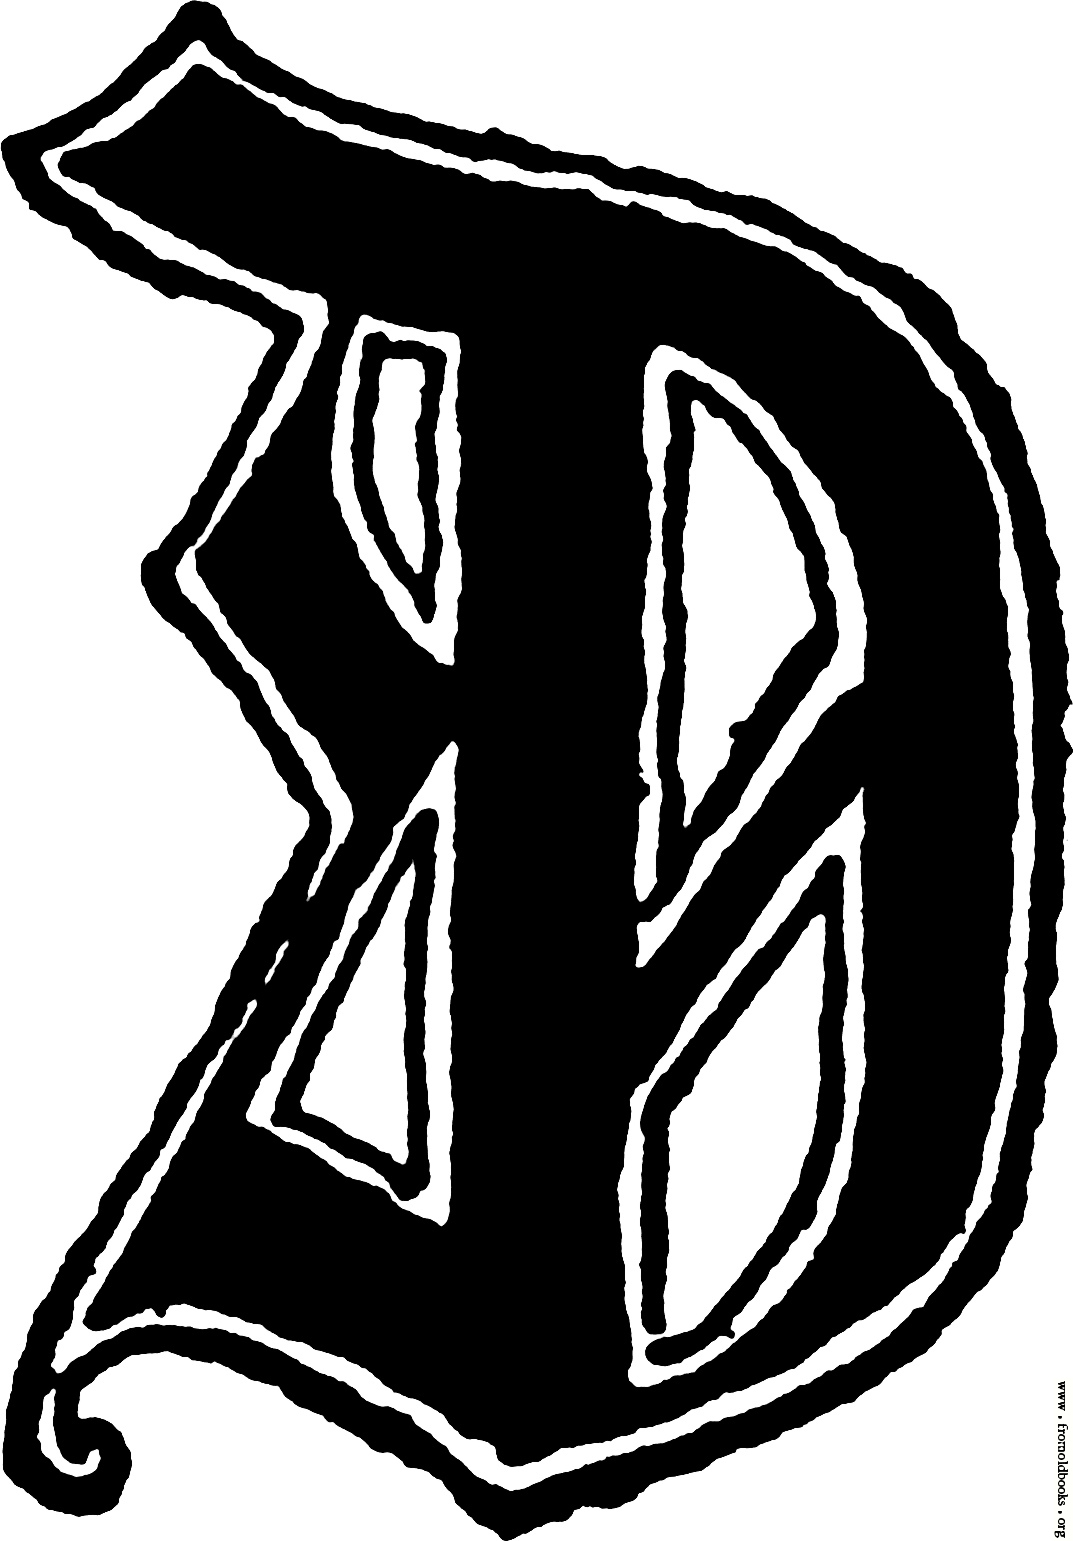 Calligraphic letter “D” in 15th century gothic style